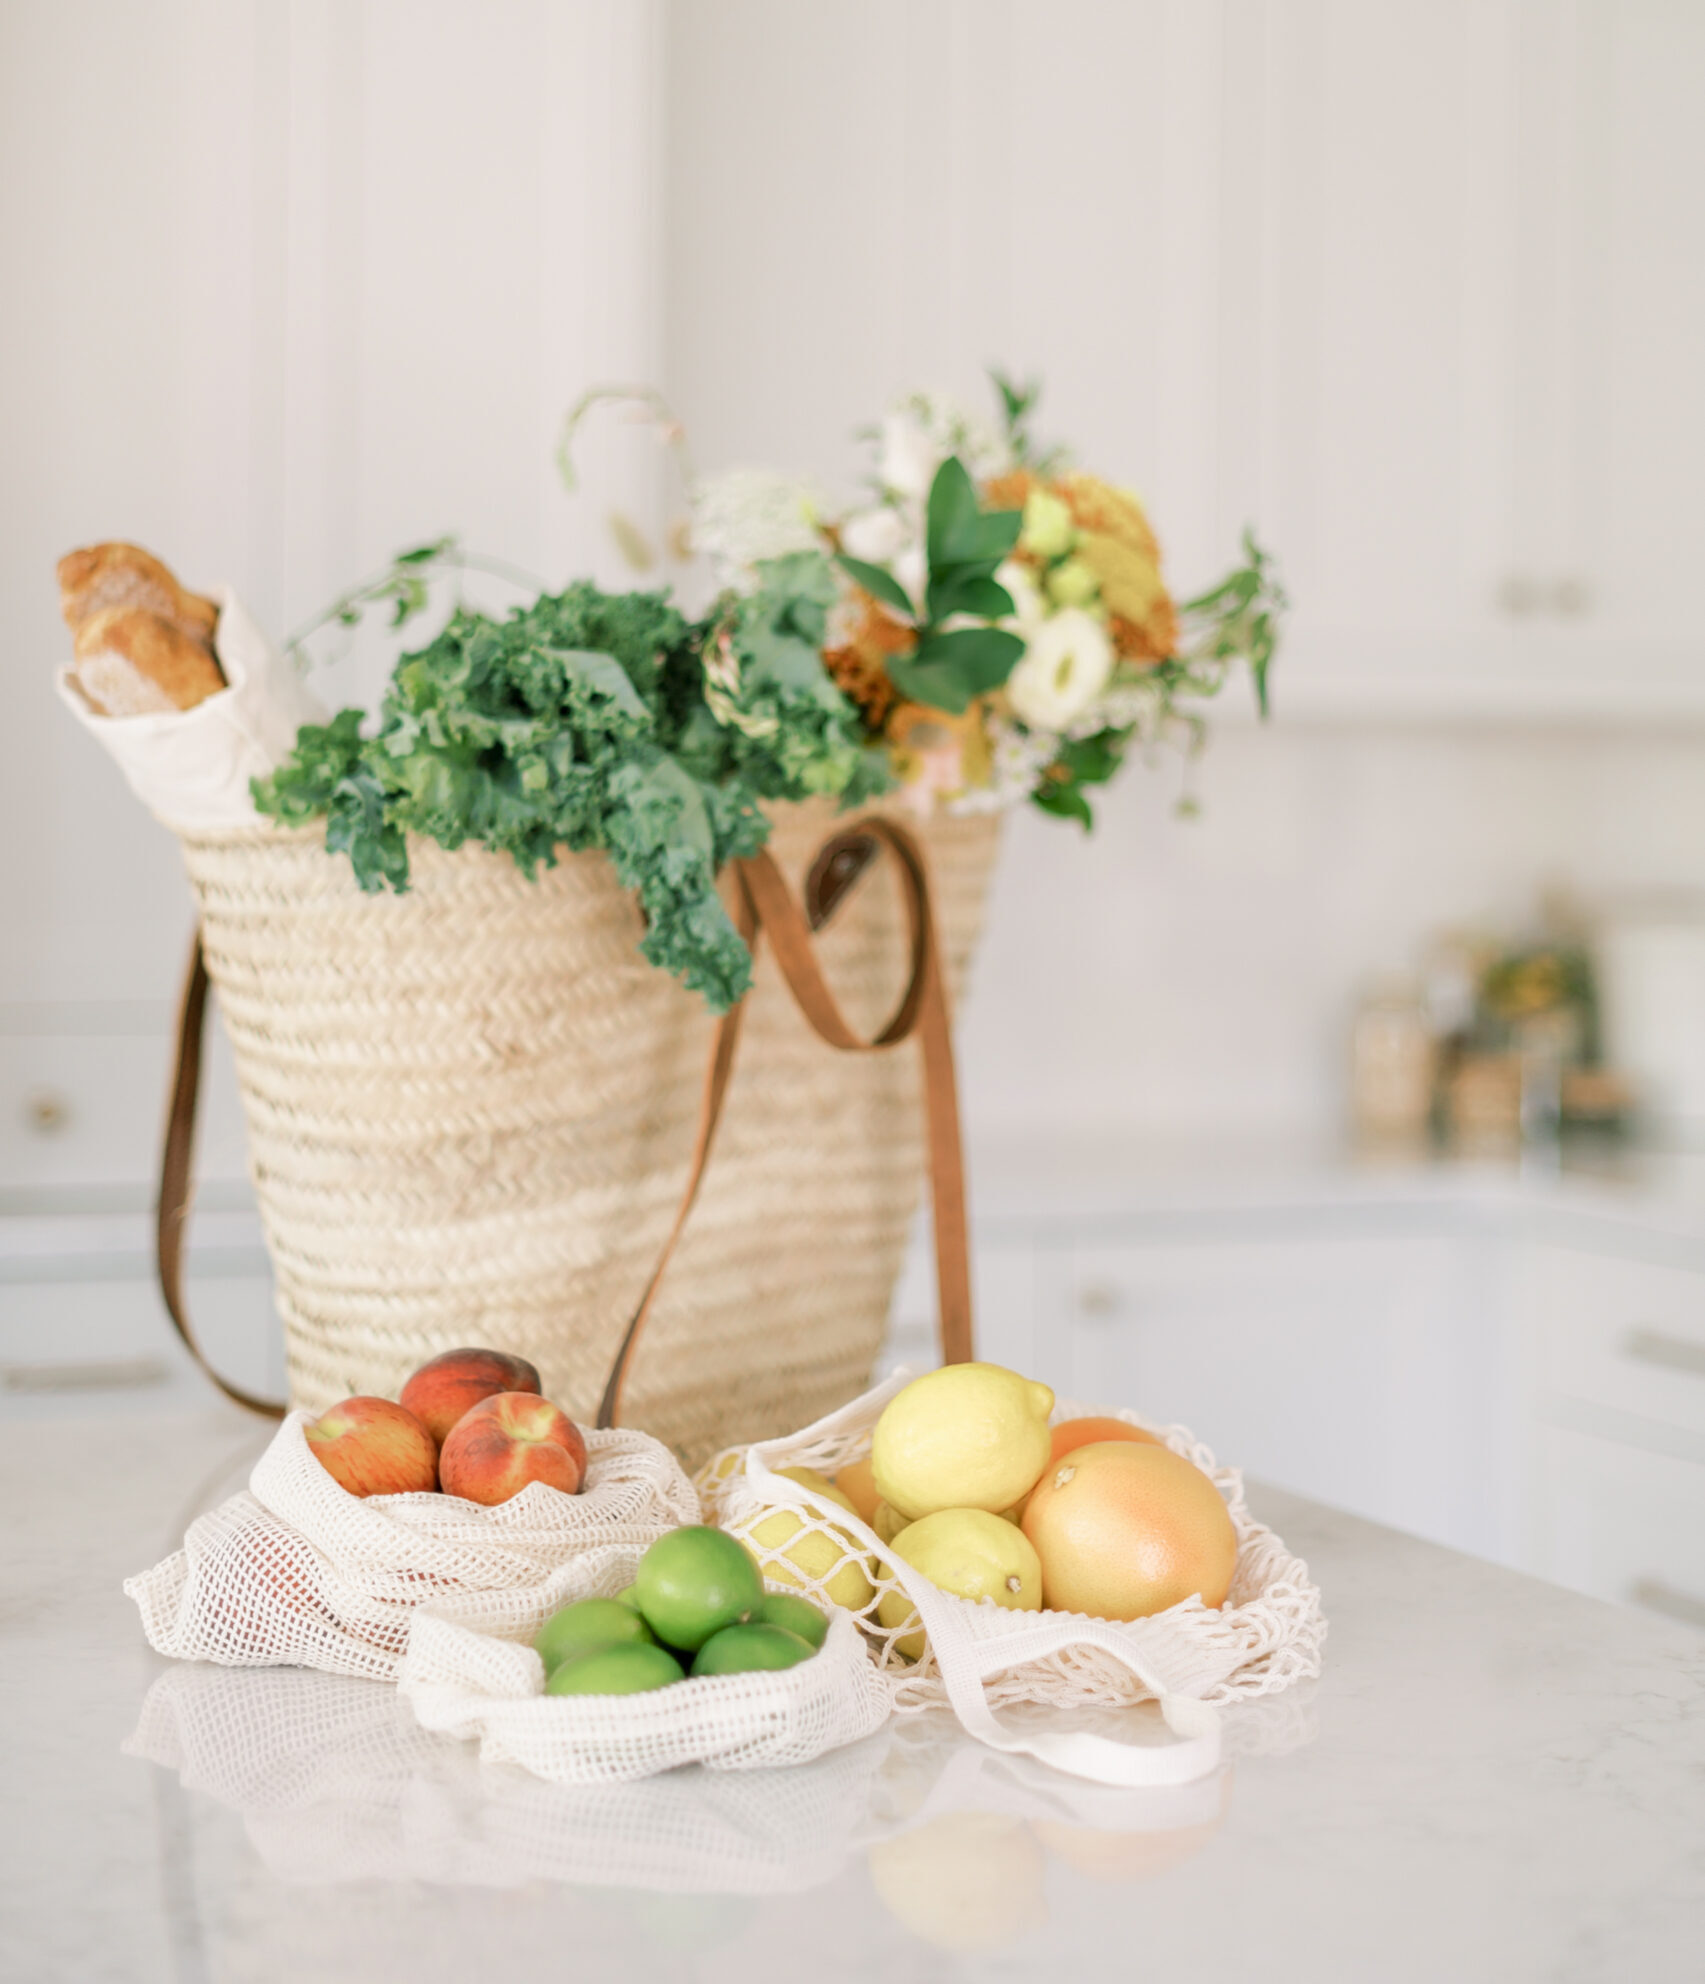 This image shows a bag of groceries with fresh food and vegetables. This episode is about nutrition principles and how to source local foods.